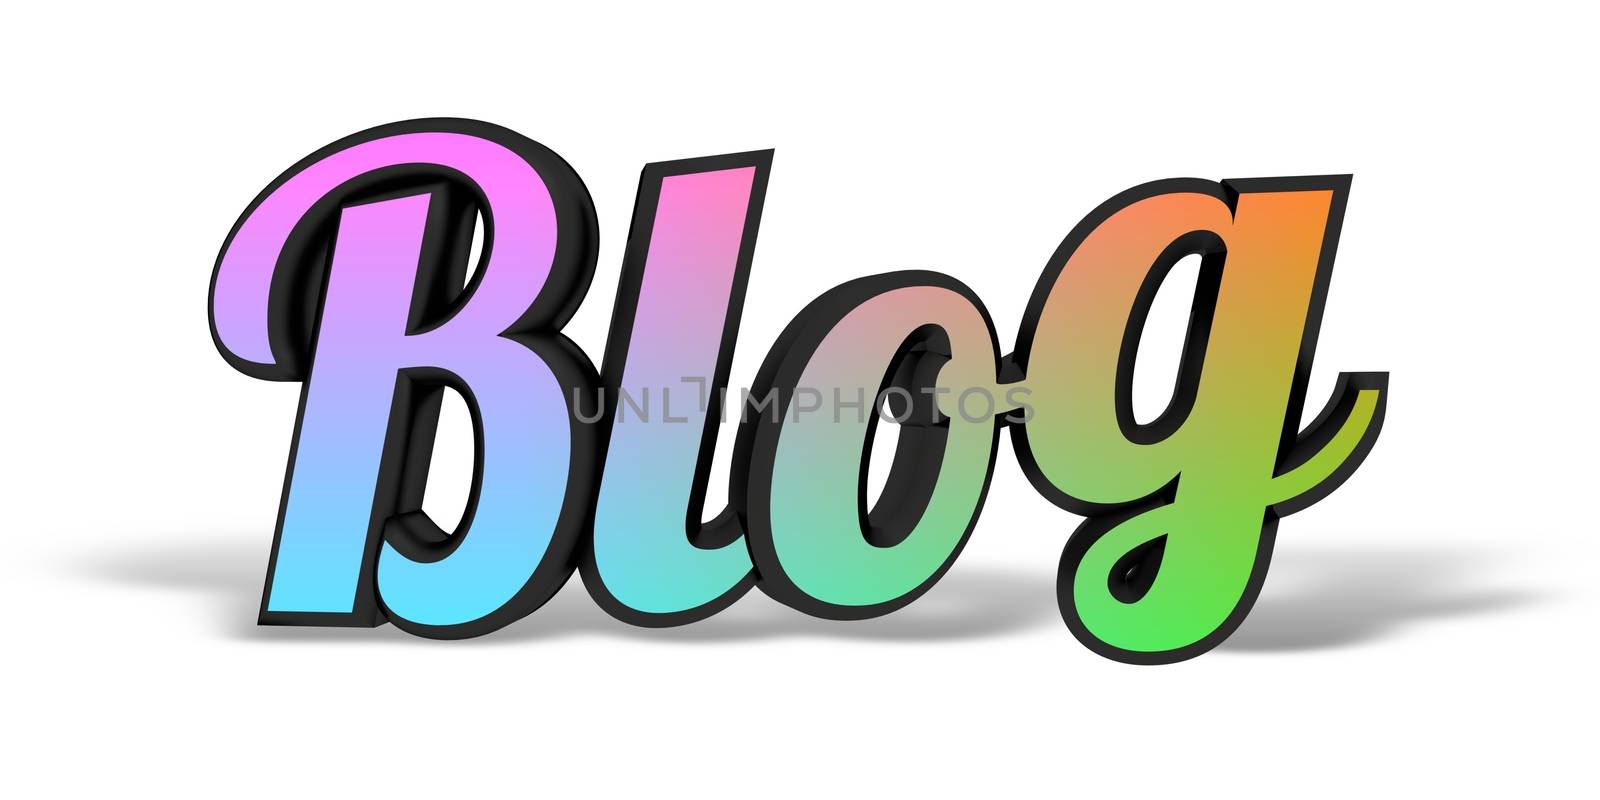 Illustration of the word blog with colorful front face and drop shadow